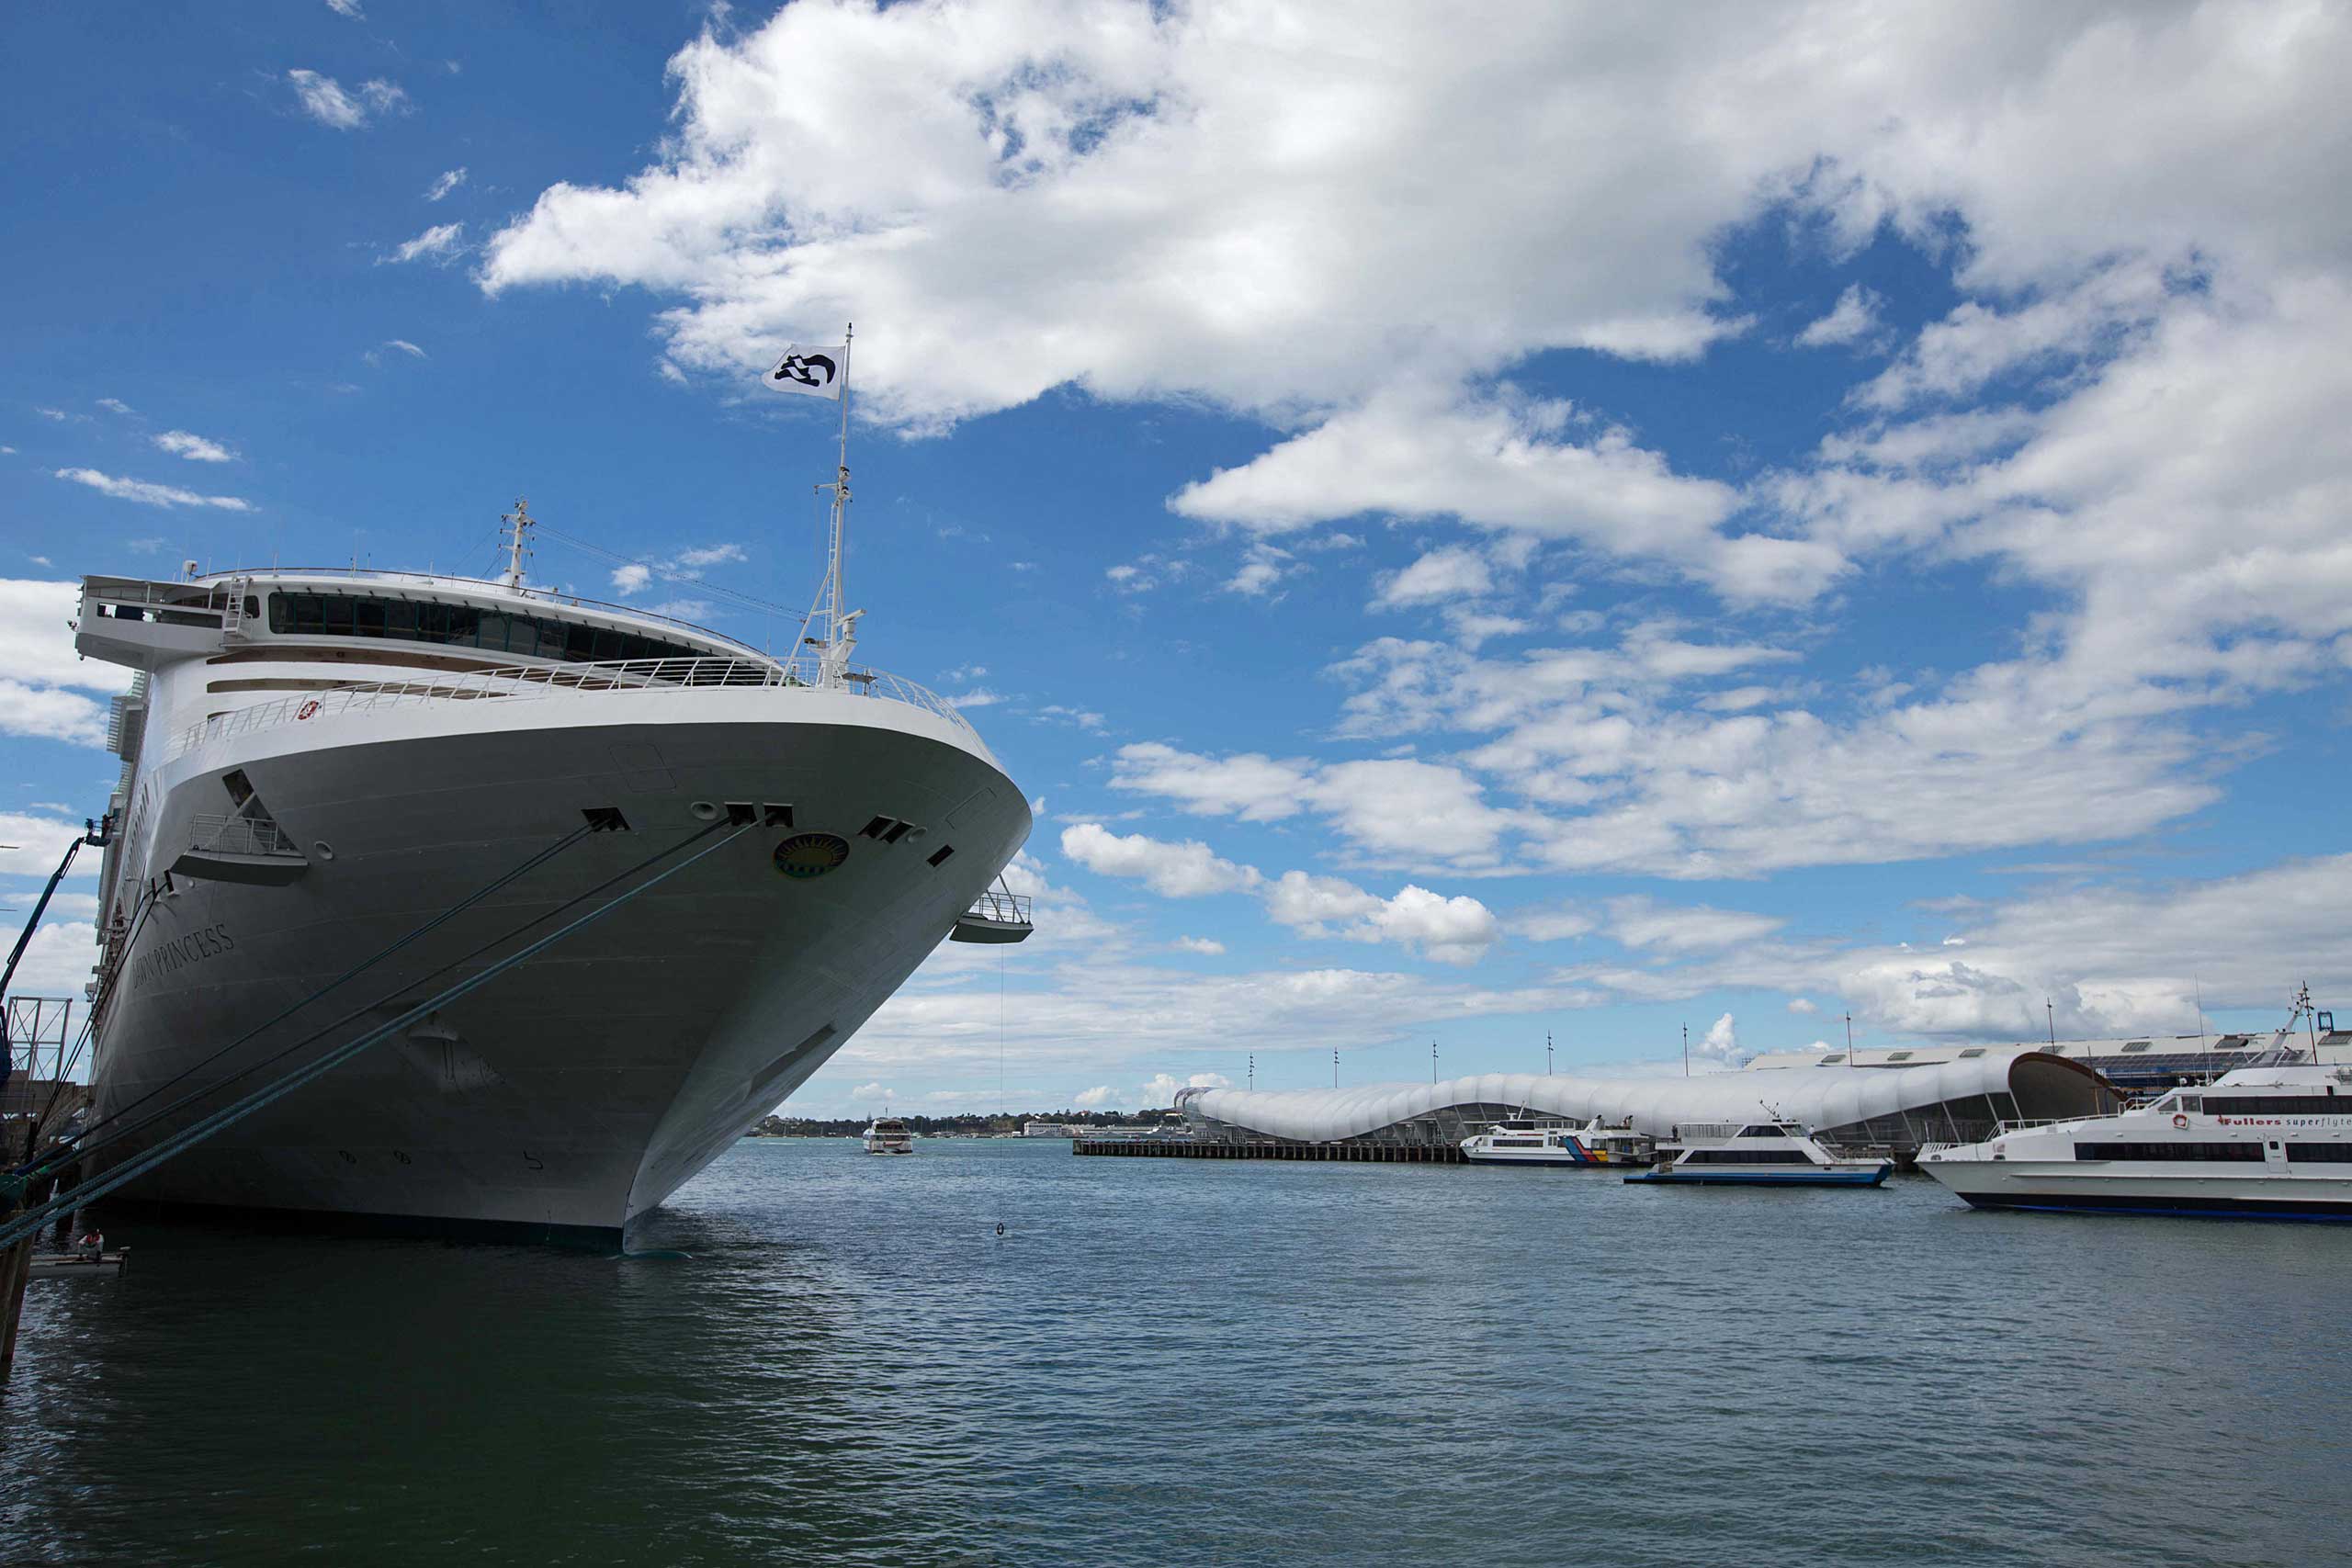 The passenger liner Dawn Princess, operated by Carnival Corp.'s Princess Cruises, sits docked at the Overseas Passenger Terminal at Princes Wharf in Auckland, New Zealand, on March 20, 2013. (Brednan O'Hagan—Bloomberg/Getty Images)